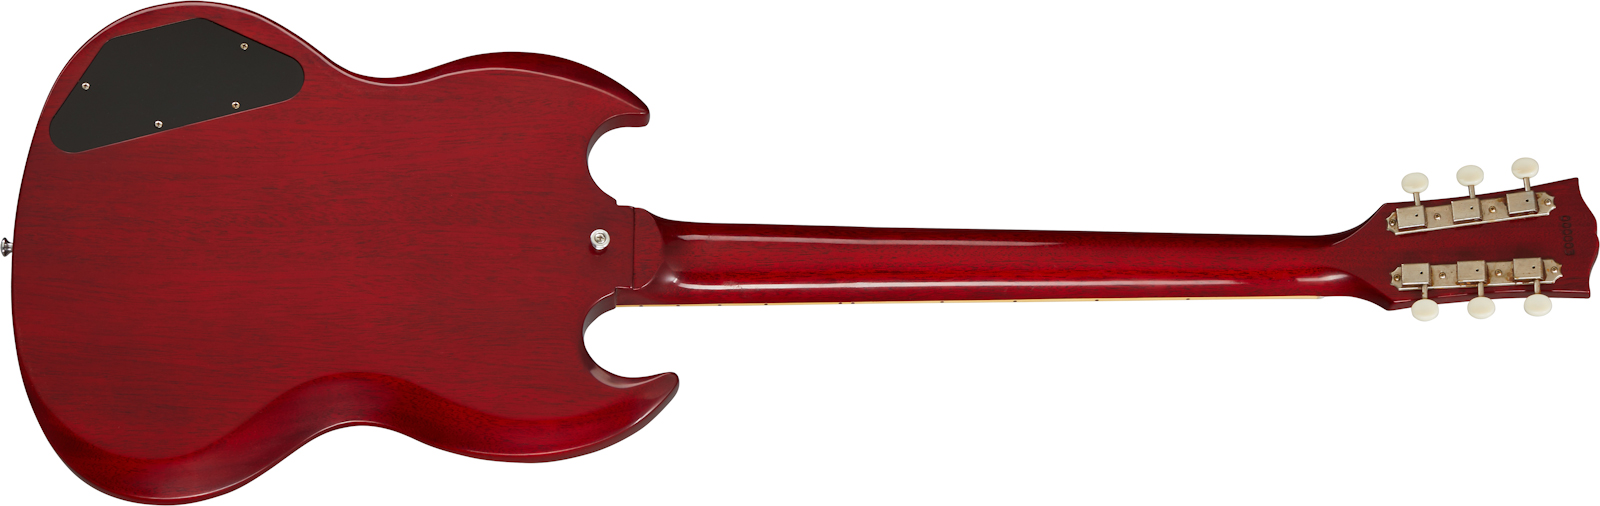 Gibson Custom Shop Sg Special 1963 Reissue 2p90 Ht Rw - Vos Cherry Red - Double Cut E-Gitarre - Variation 1